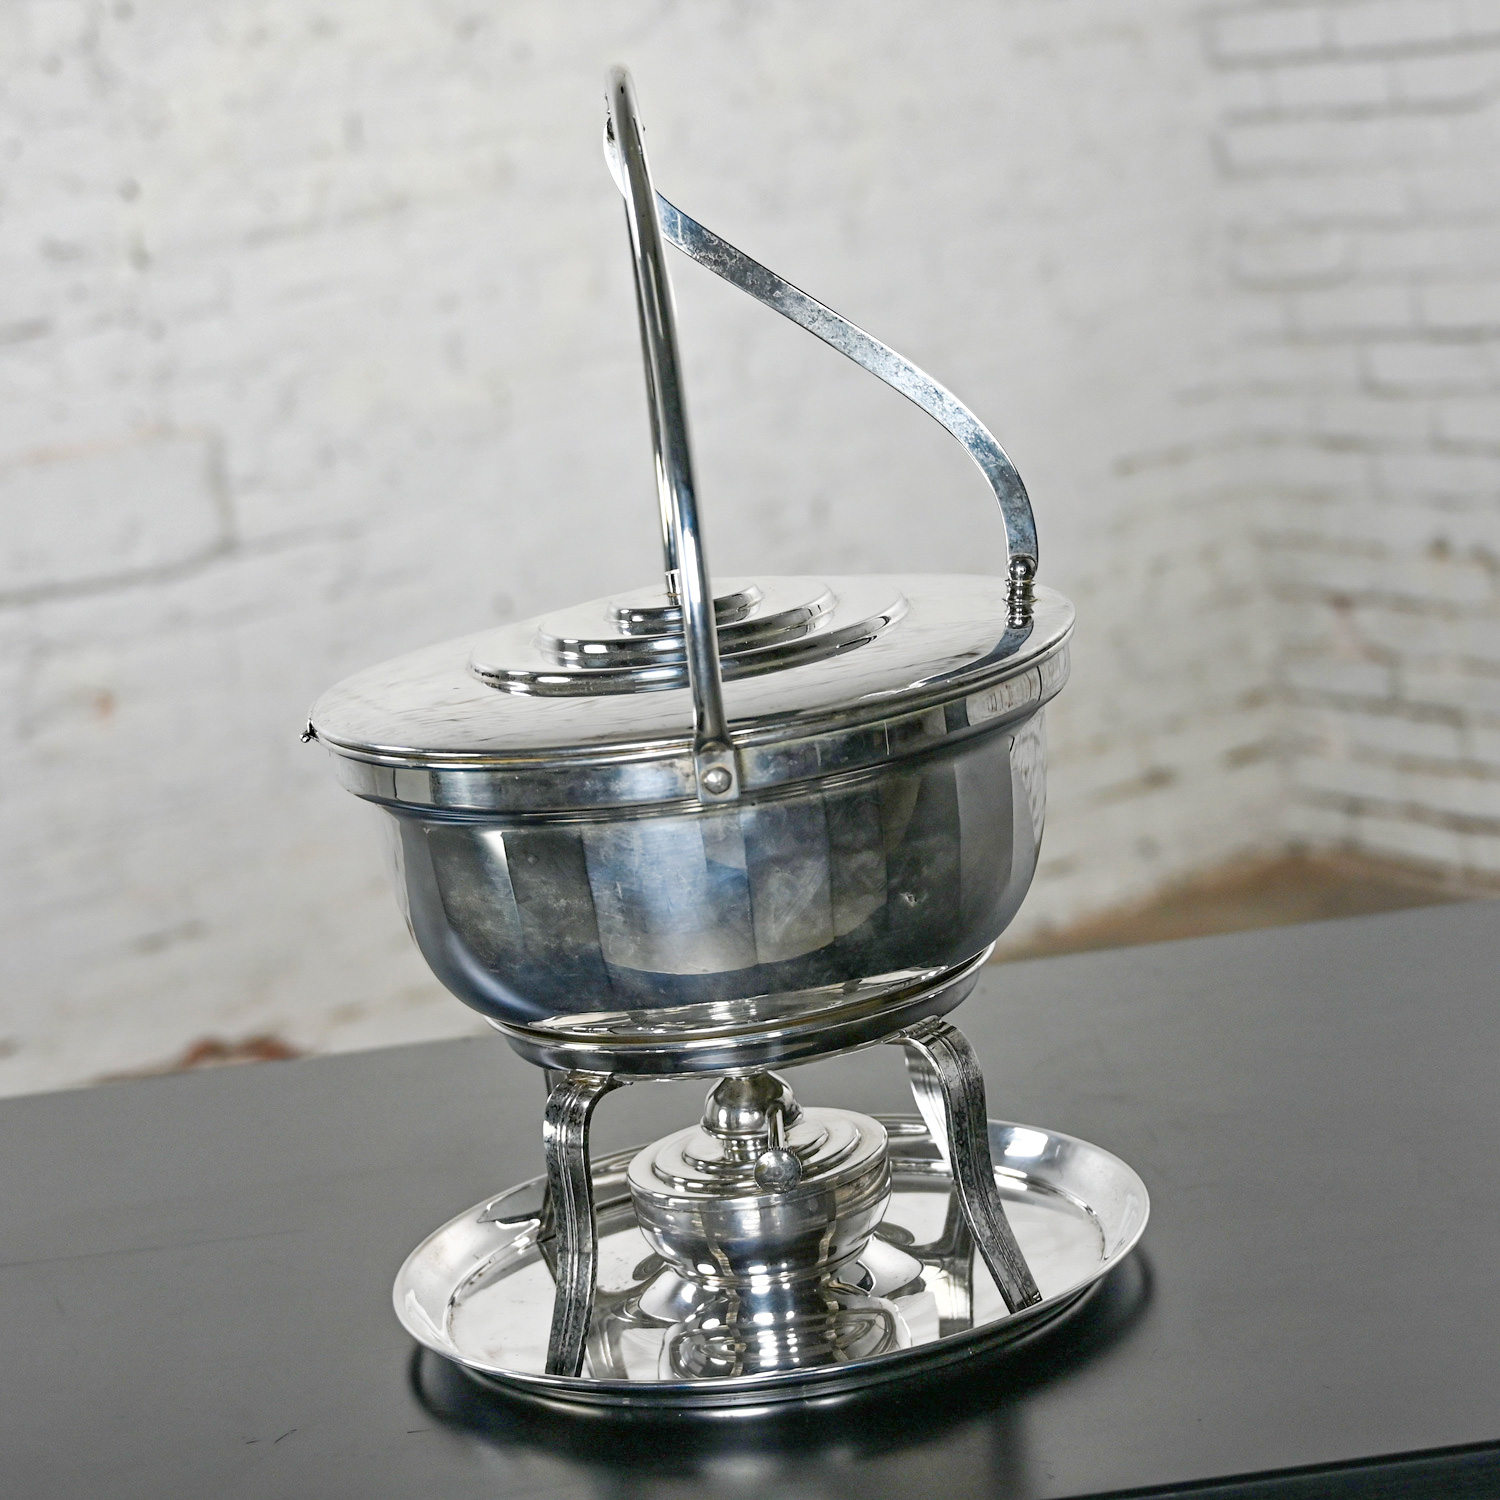 Mid-Late 20th Century Art Deco Revival Silver Plated Round Chafing Dish Buffet Set 5 Pieces by English Silver Manufacturing Company